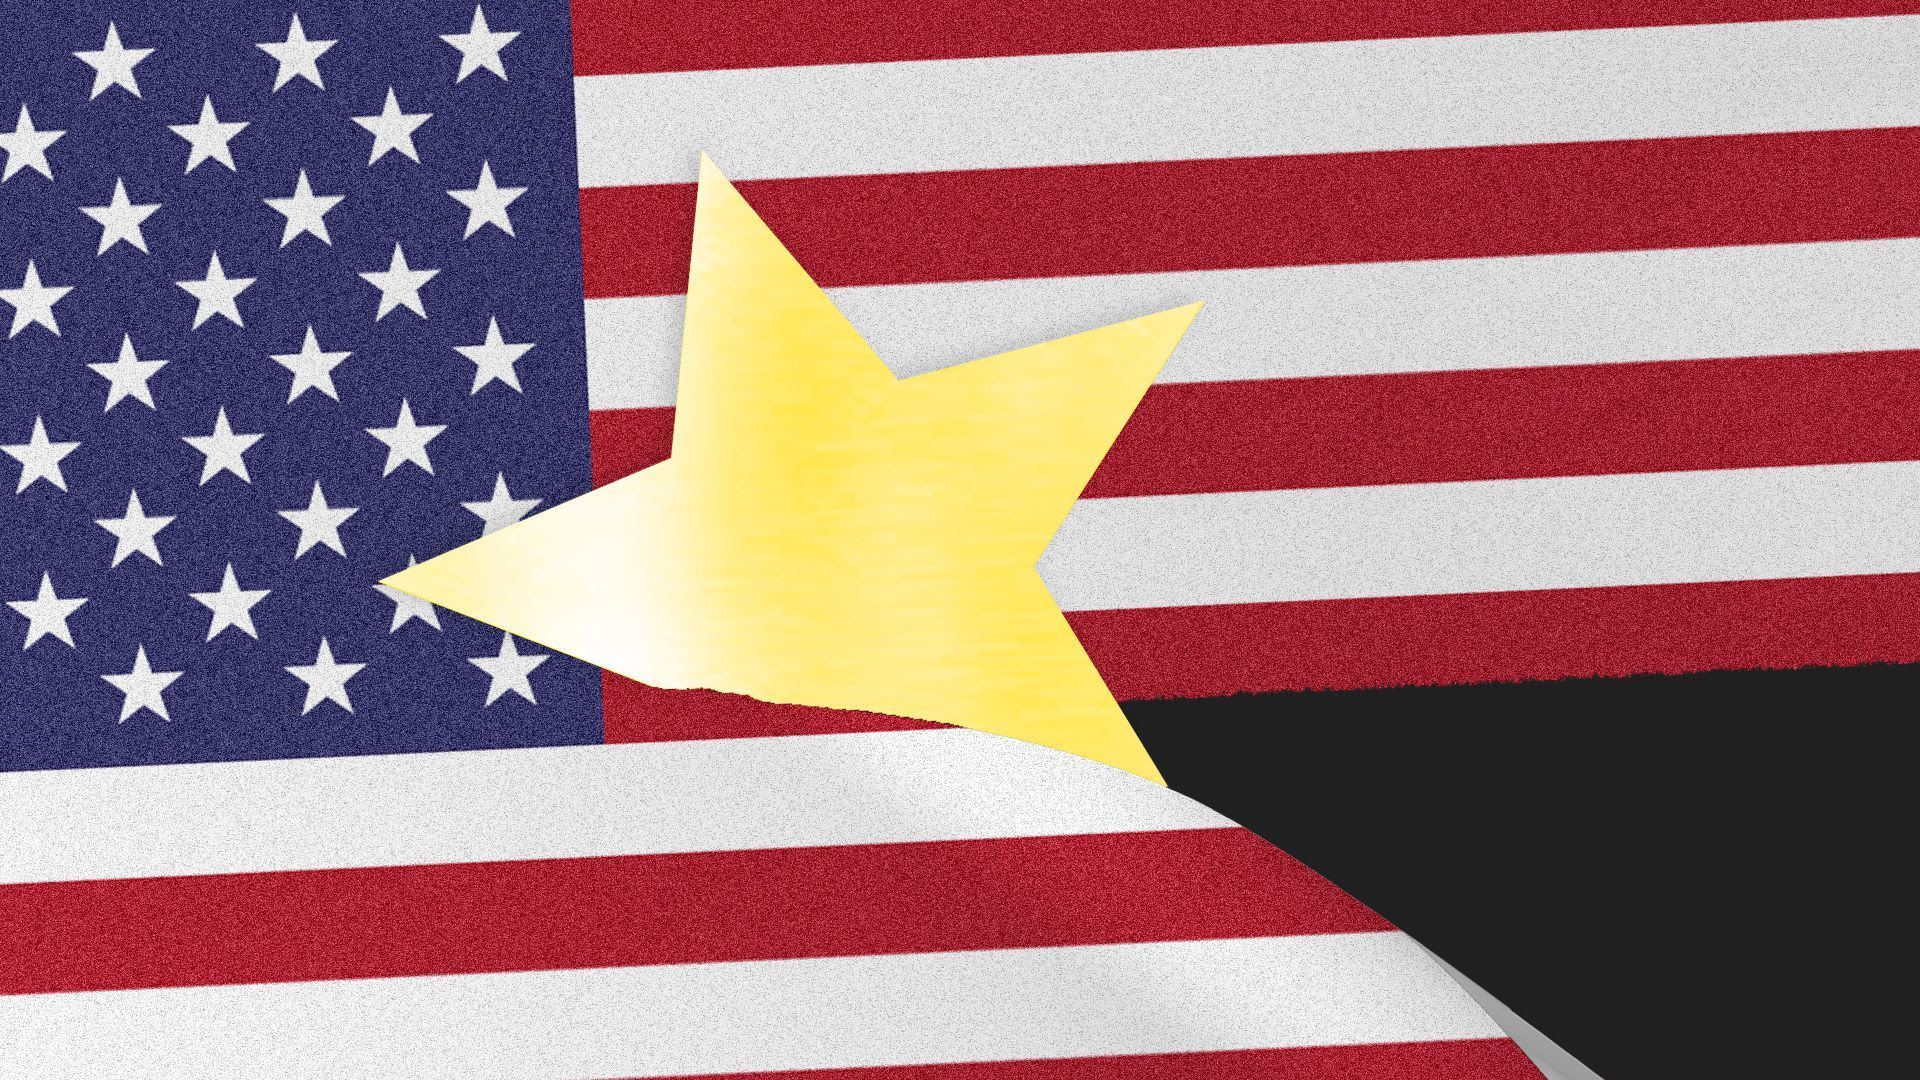 Graphic of star cutting into the U.S. flag